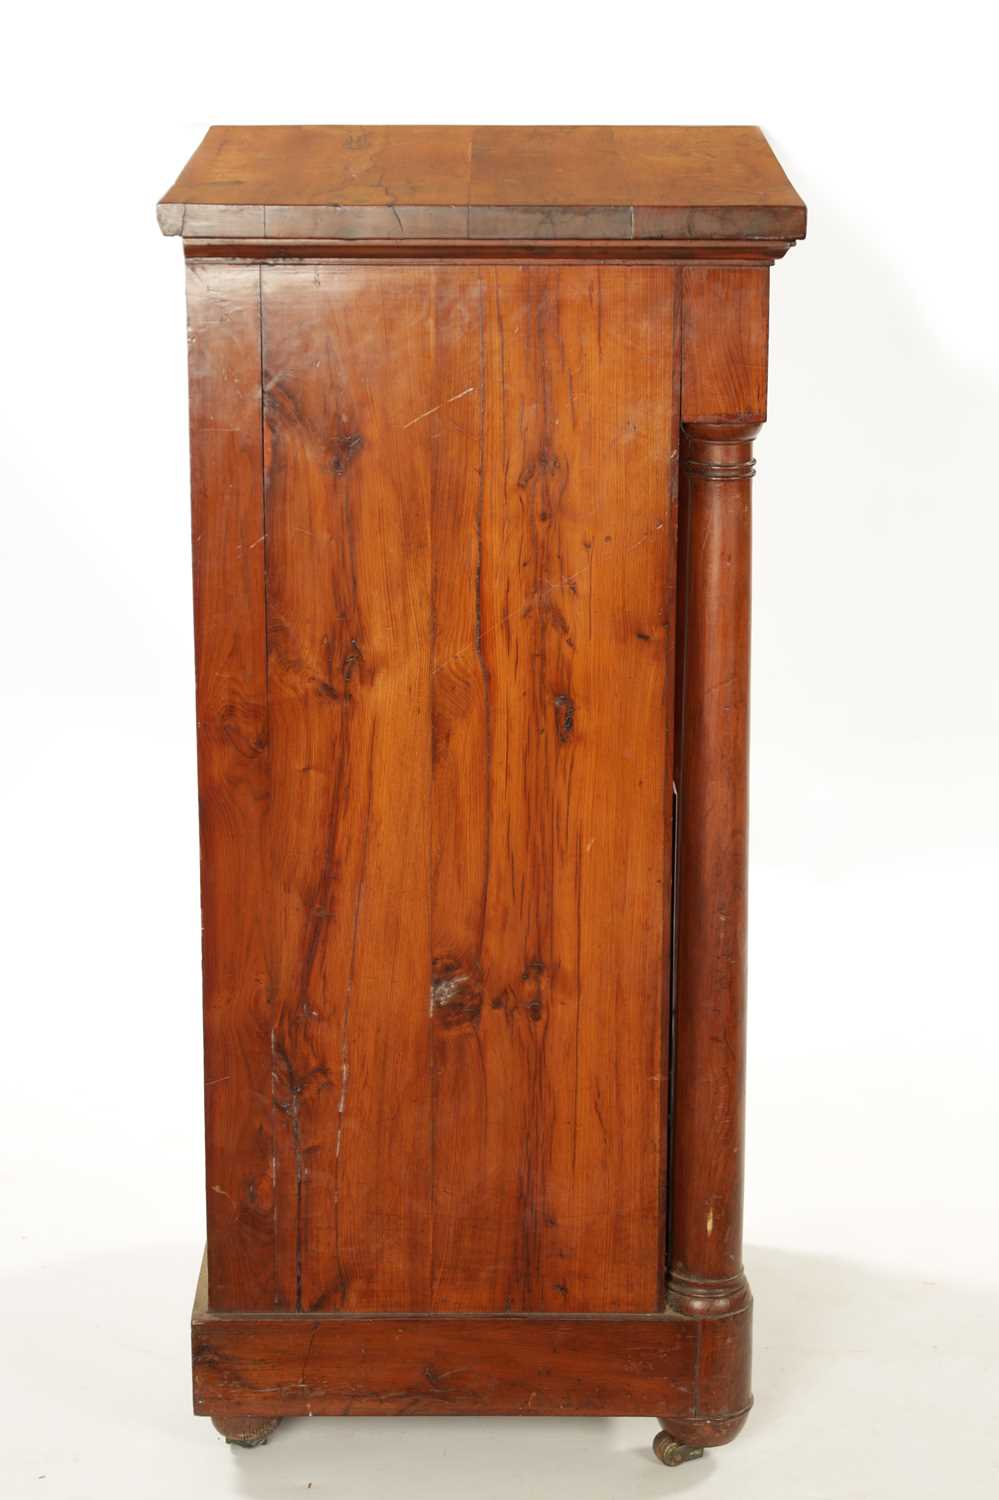 AN 18TH CENTURY EMPIRE STYLE YEW-WOOD BEDSIDE CABINET - Image 6 of 9